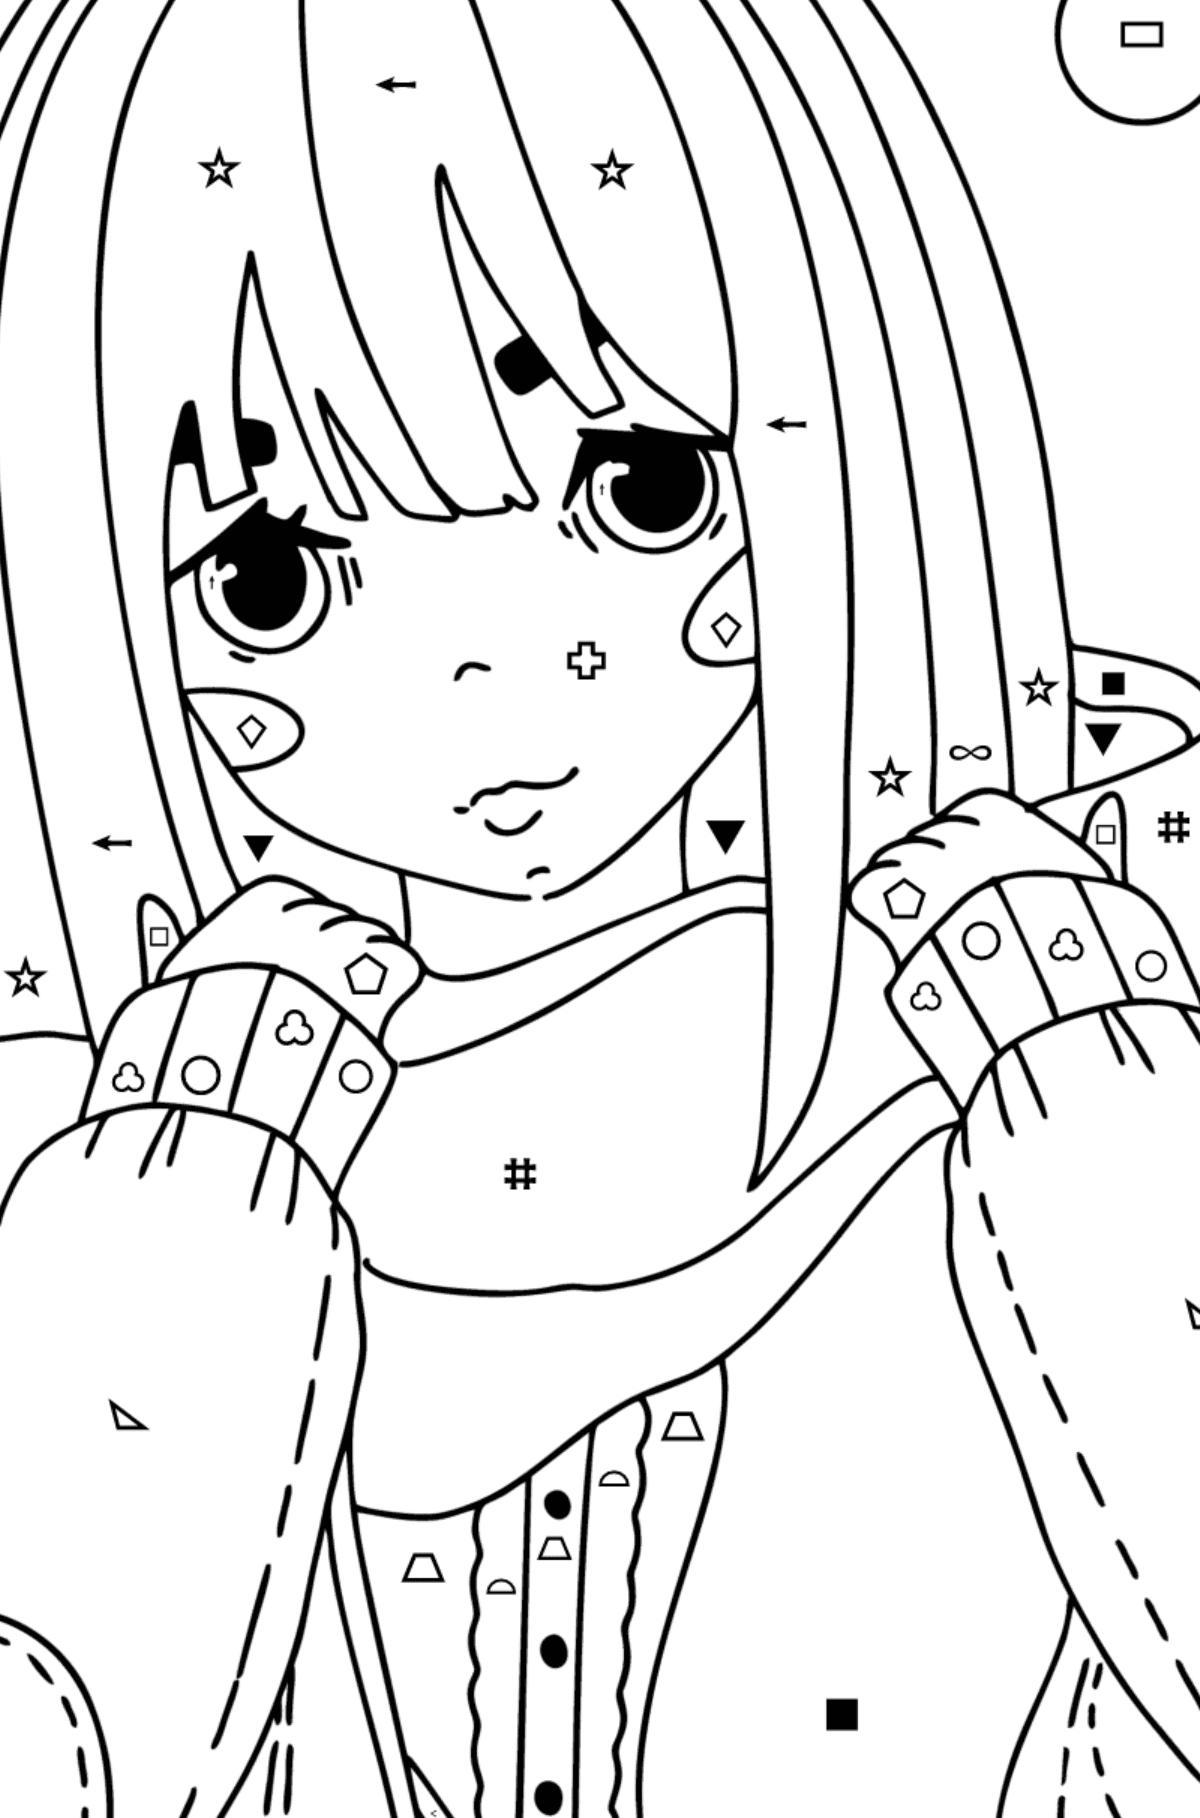 Cool anime girl coloring page - Coloring by Symbols and Geometric Shapes for Kids